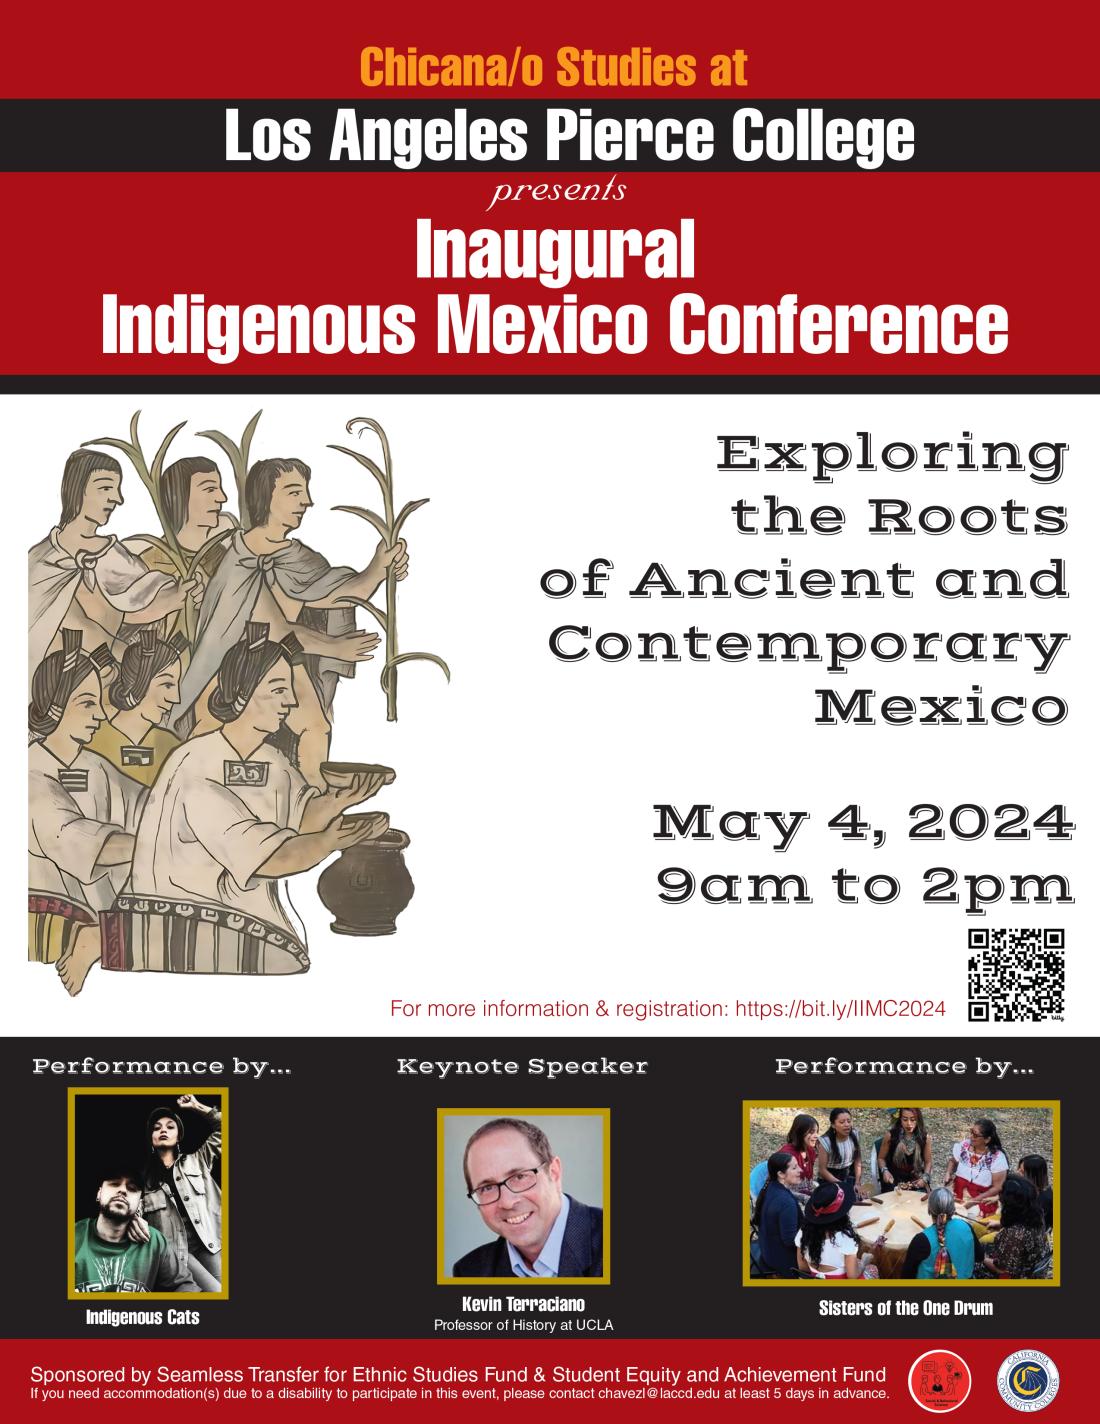 flyer advertising the Pierce College Inaugural Indigenous Mexico Conference